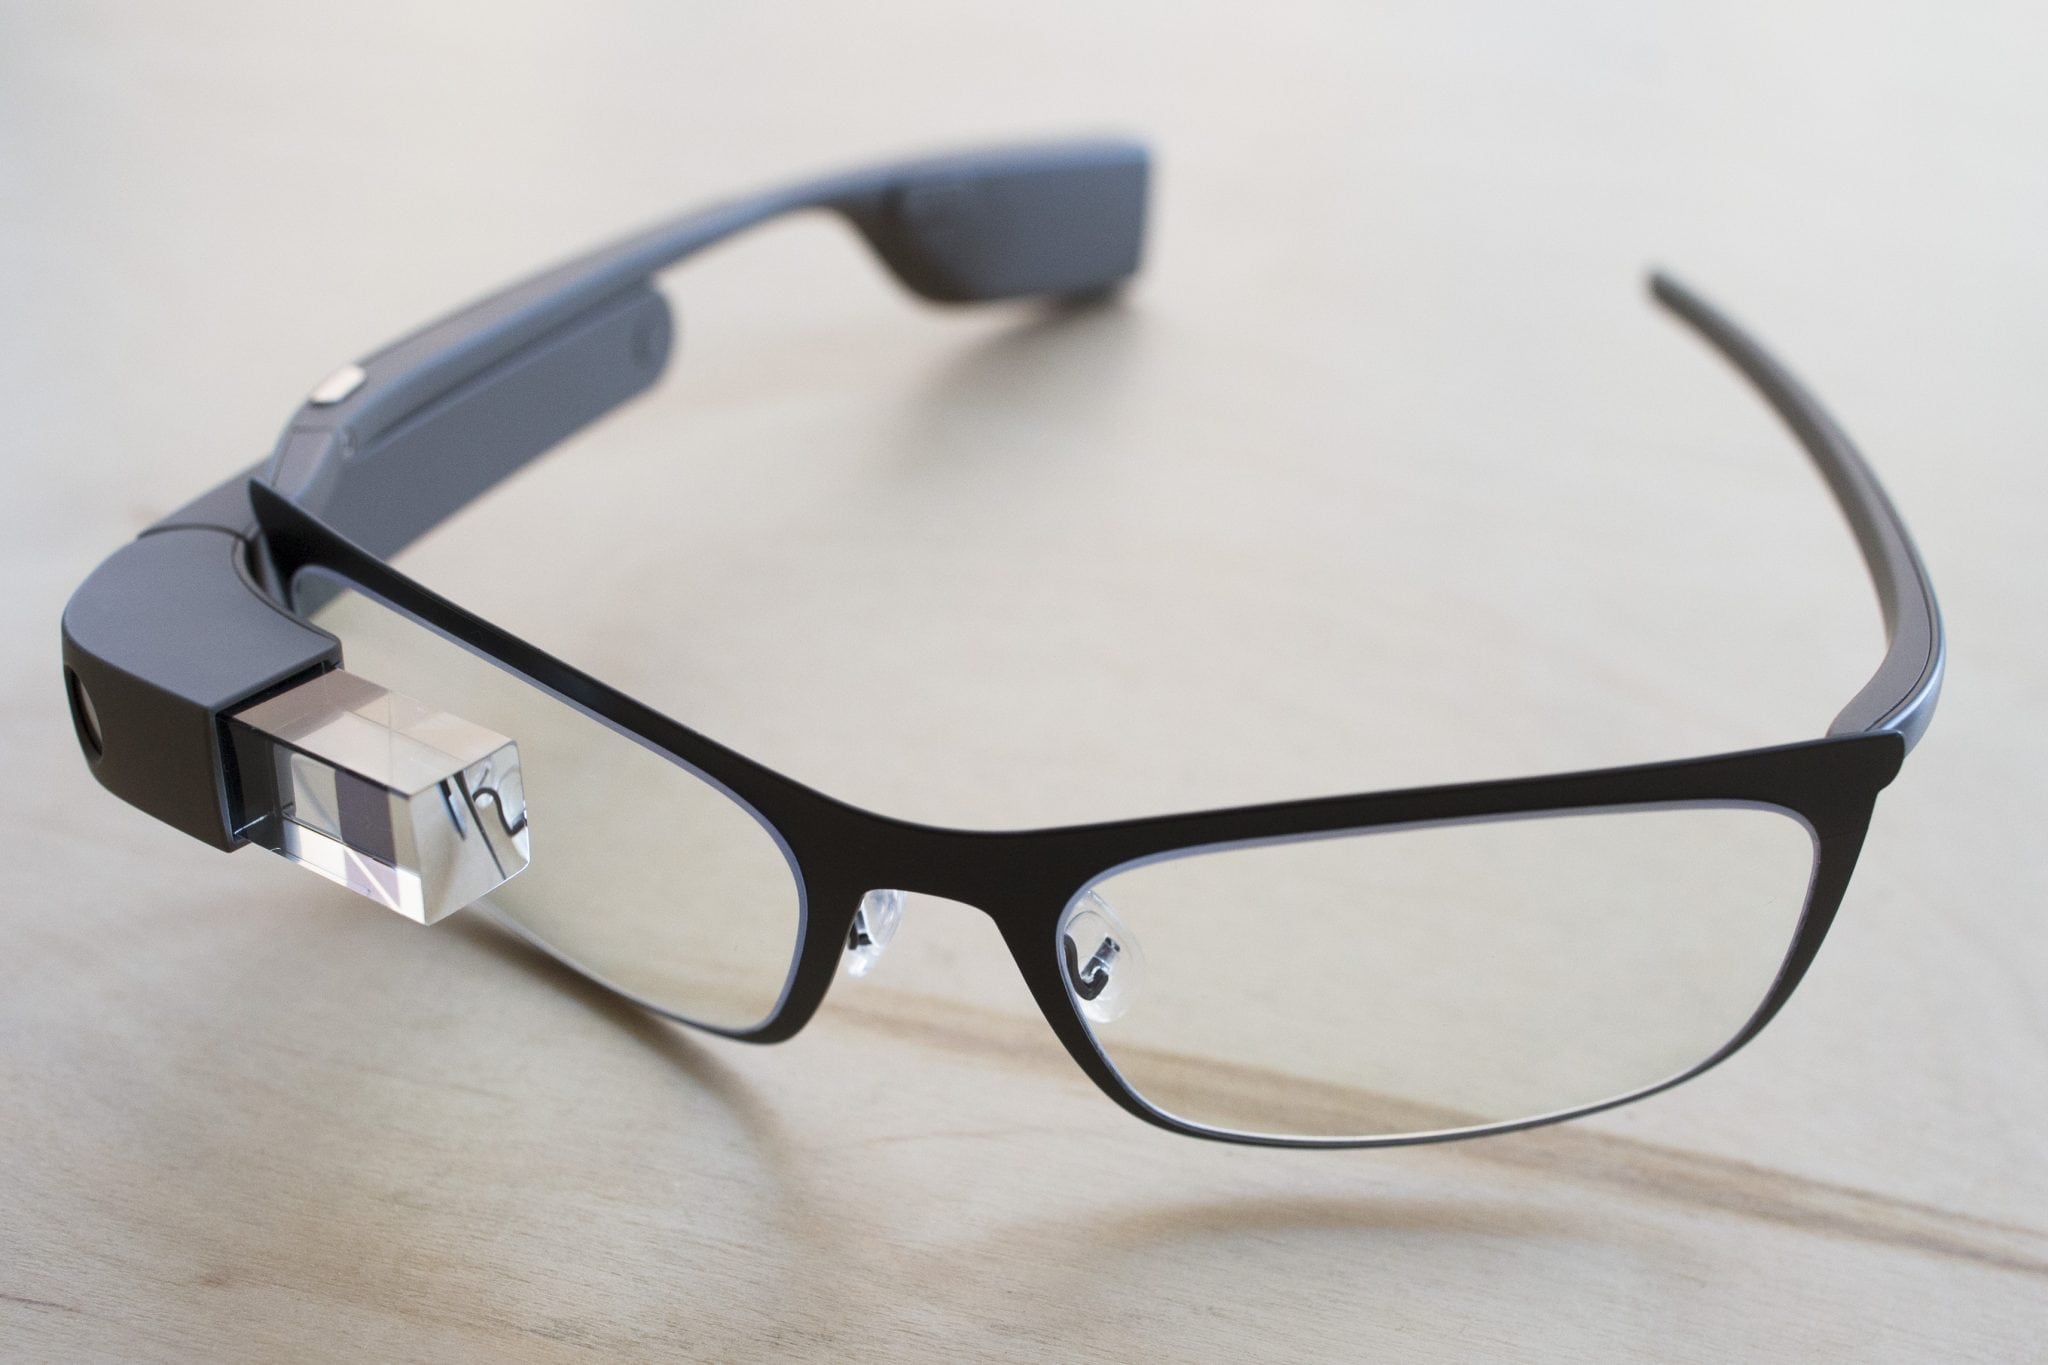 The new Google Glass 